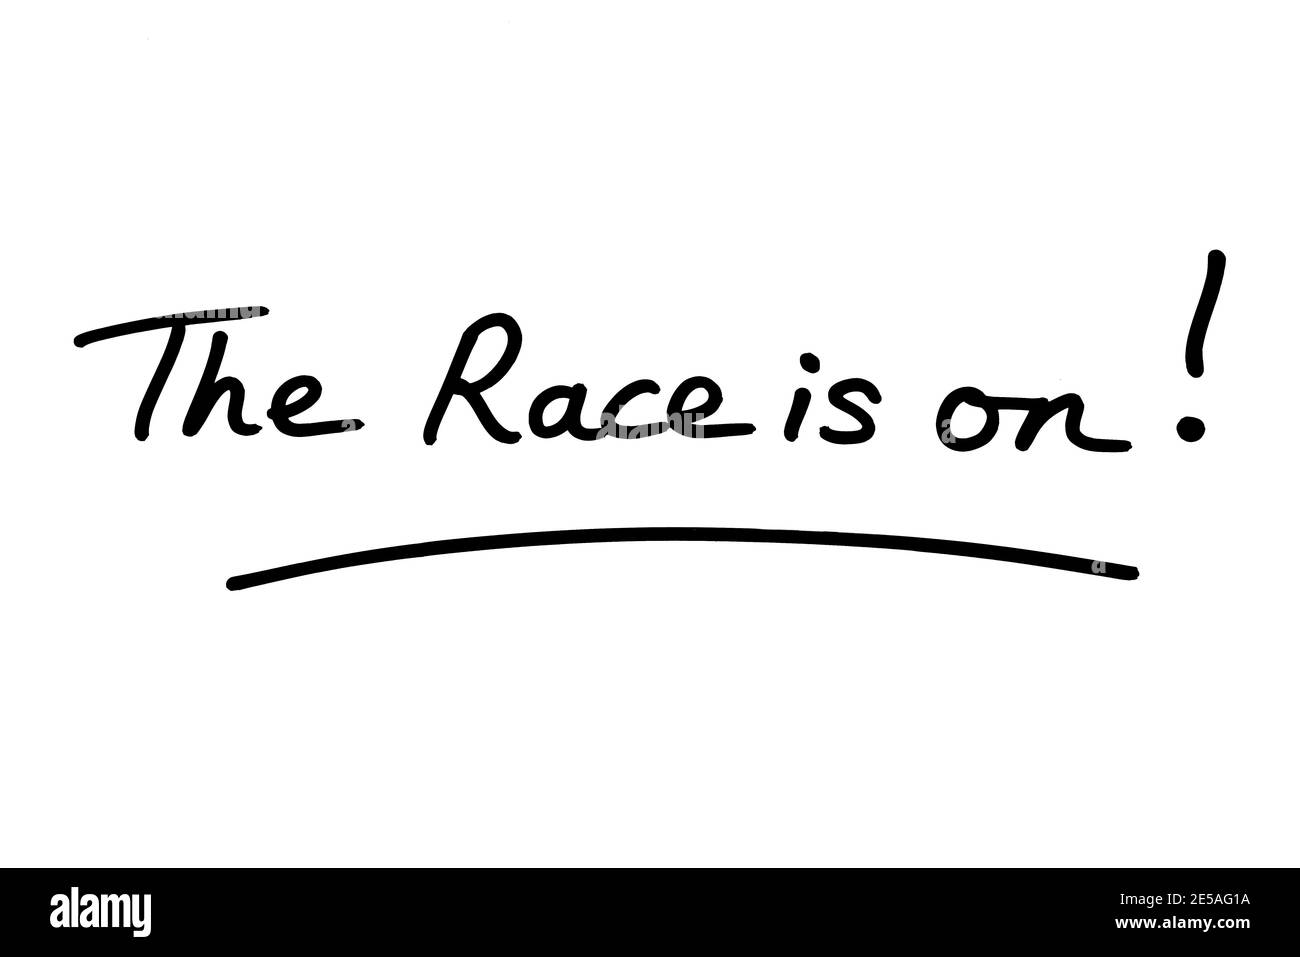 The Race is on! handwritten on a white background. Stock Photo